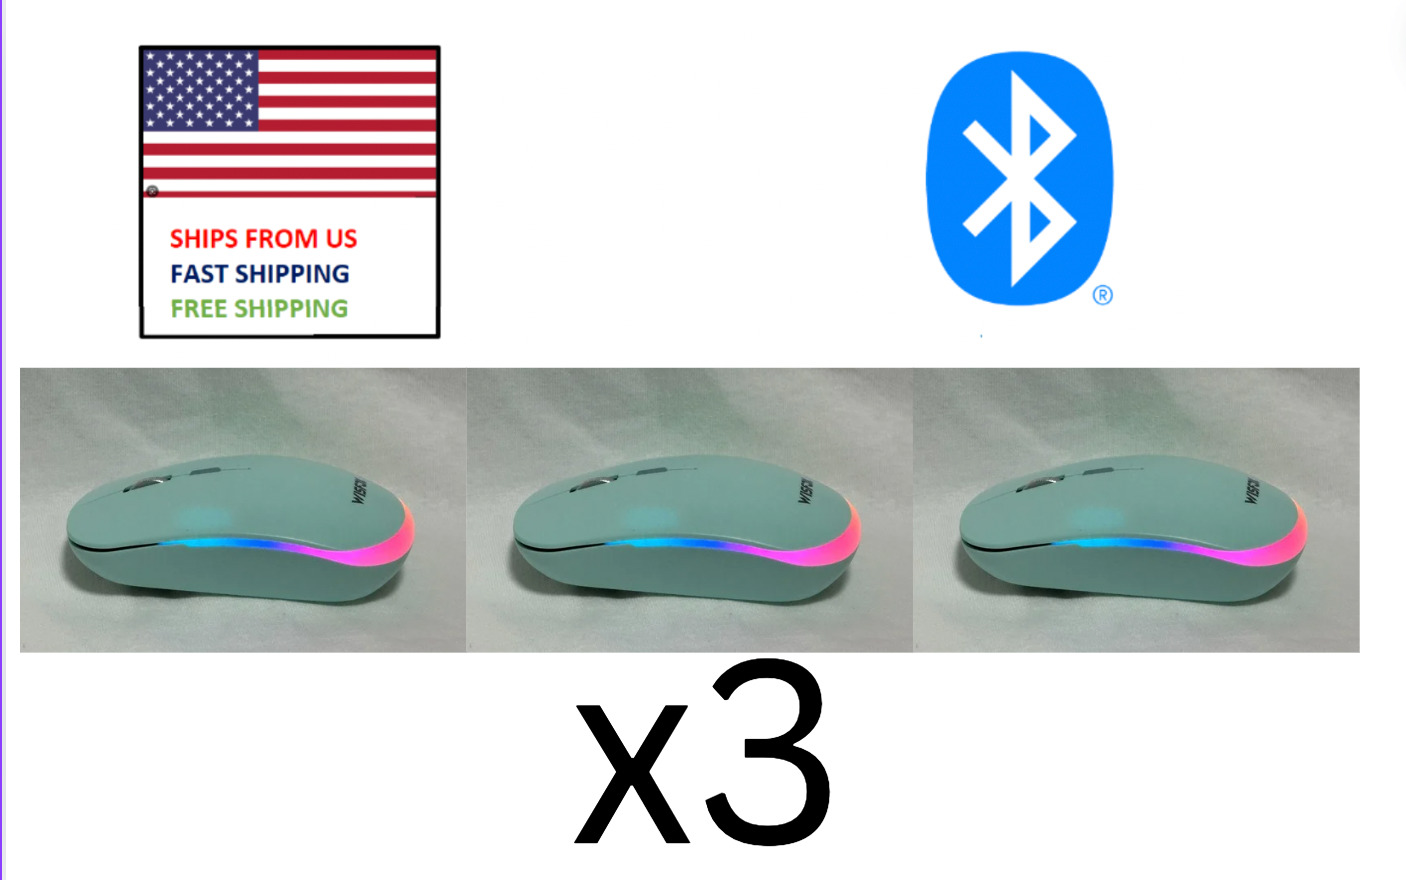 x3 Aqua RGB LED Wireless Mouse Rechargeable Bluetooth Dongle Receive 2.4G